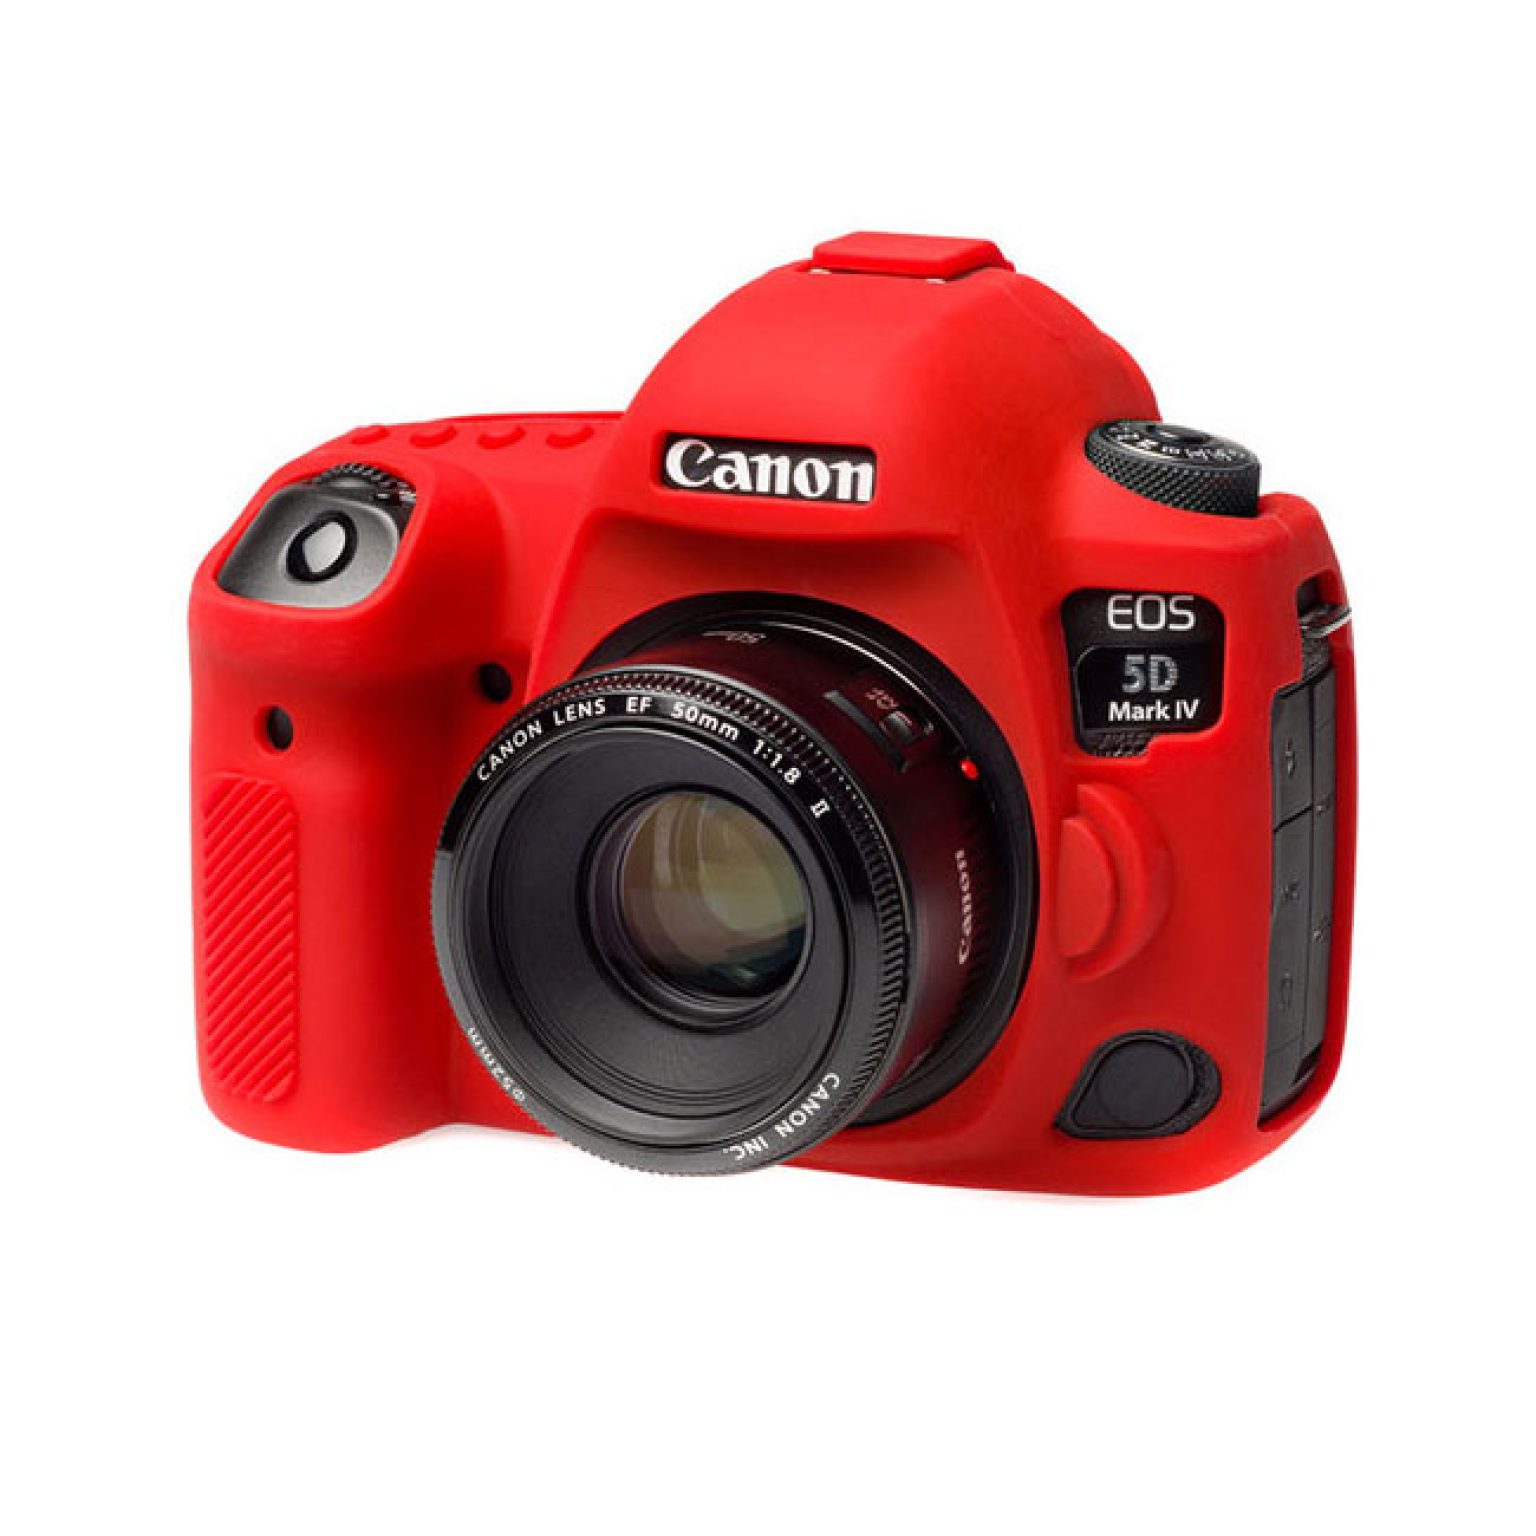 easyCover Silicone Protection Cover for Canon 5D Mark IV1